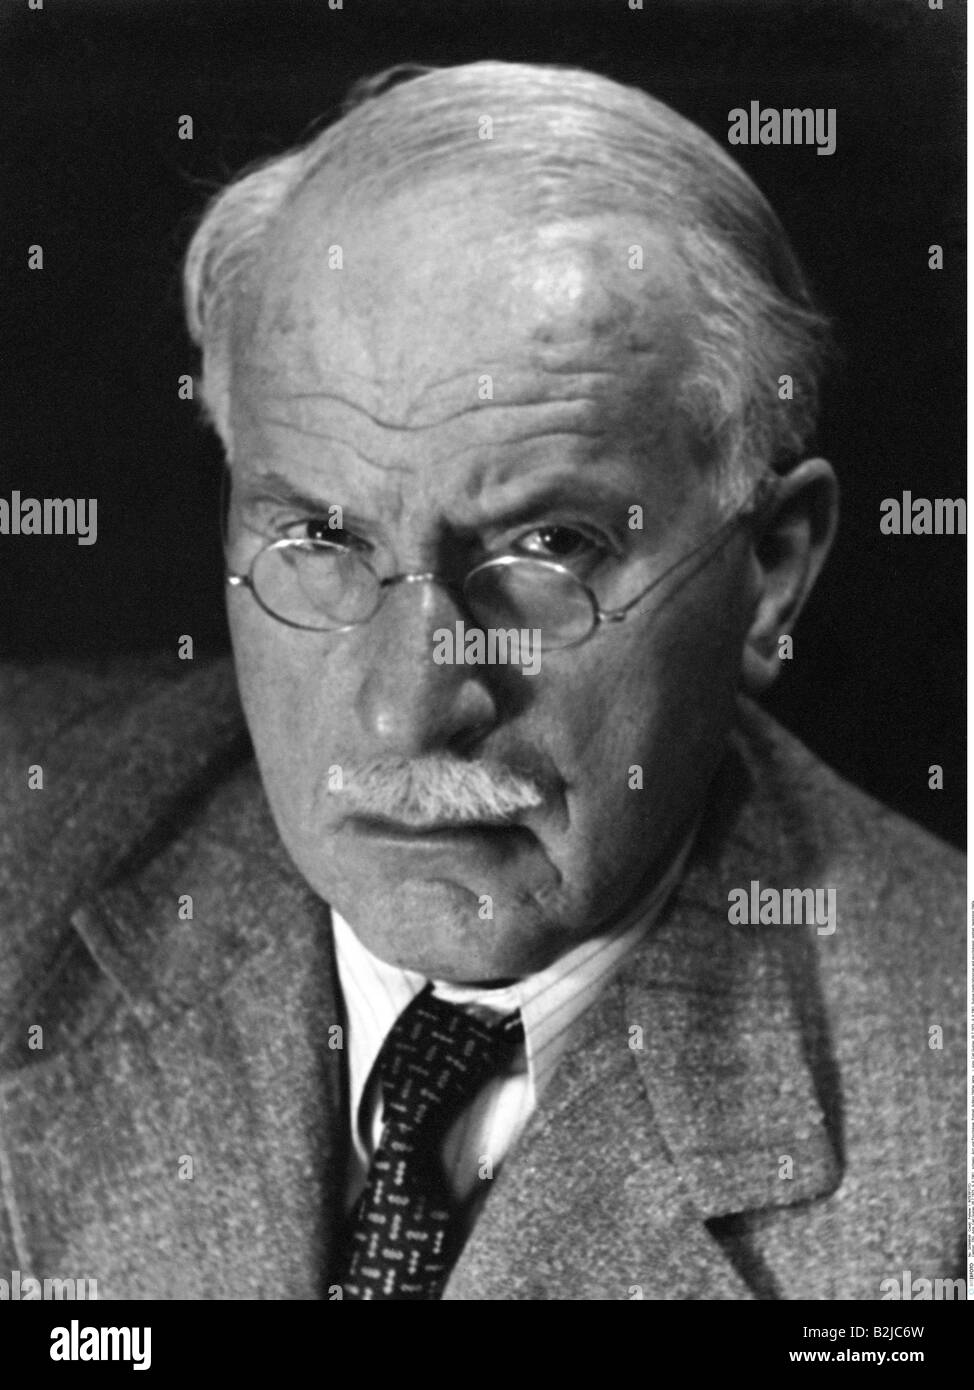 121 Carl Jung Royalty-Free Photos and Stock Images